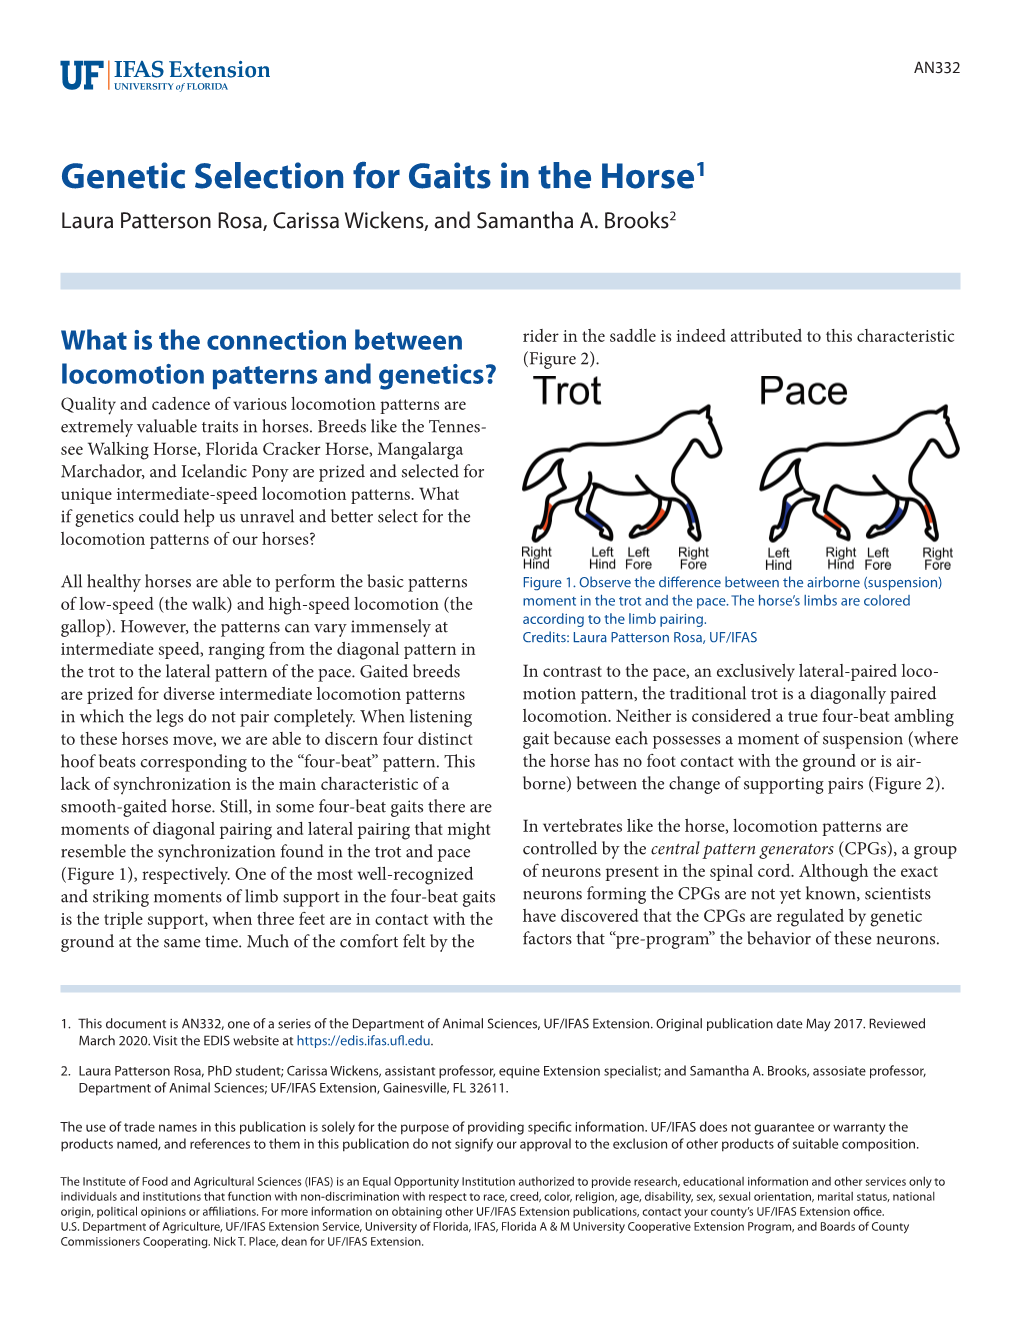 Genetic Selection for Gaits in the Horse1 Laura Patterson Rosa, Carissa Wickens, and Samantha A